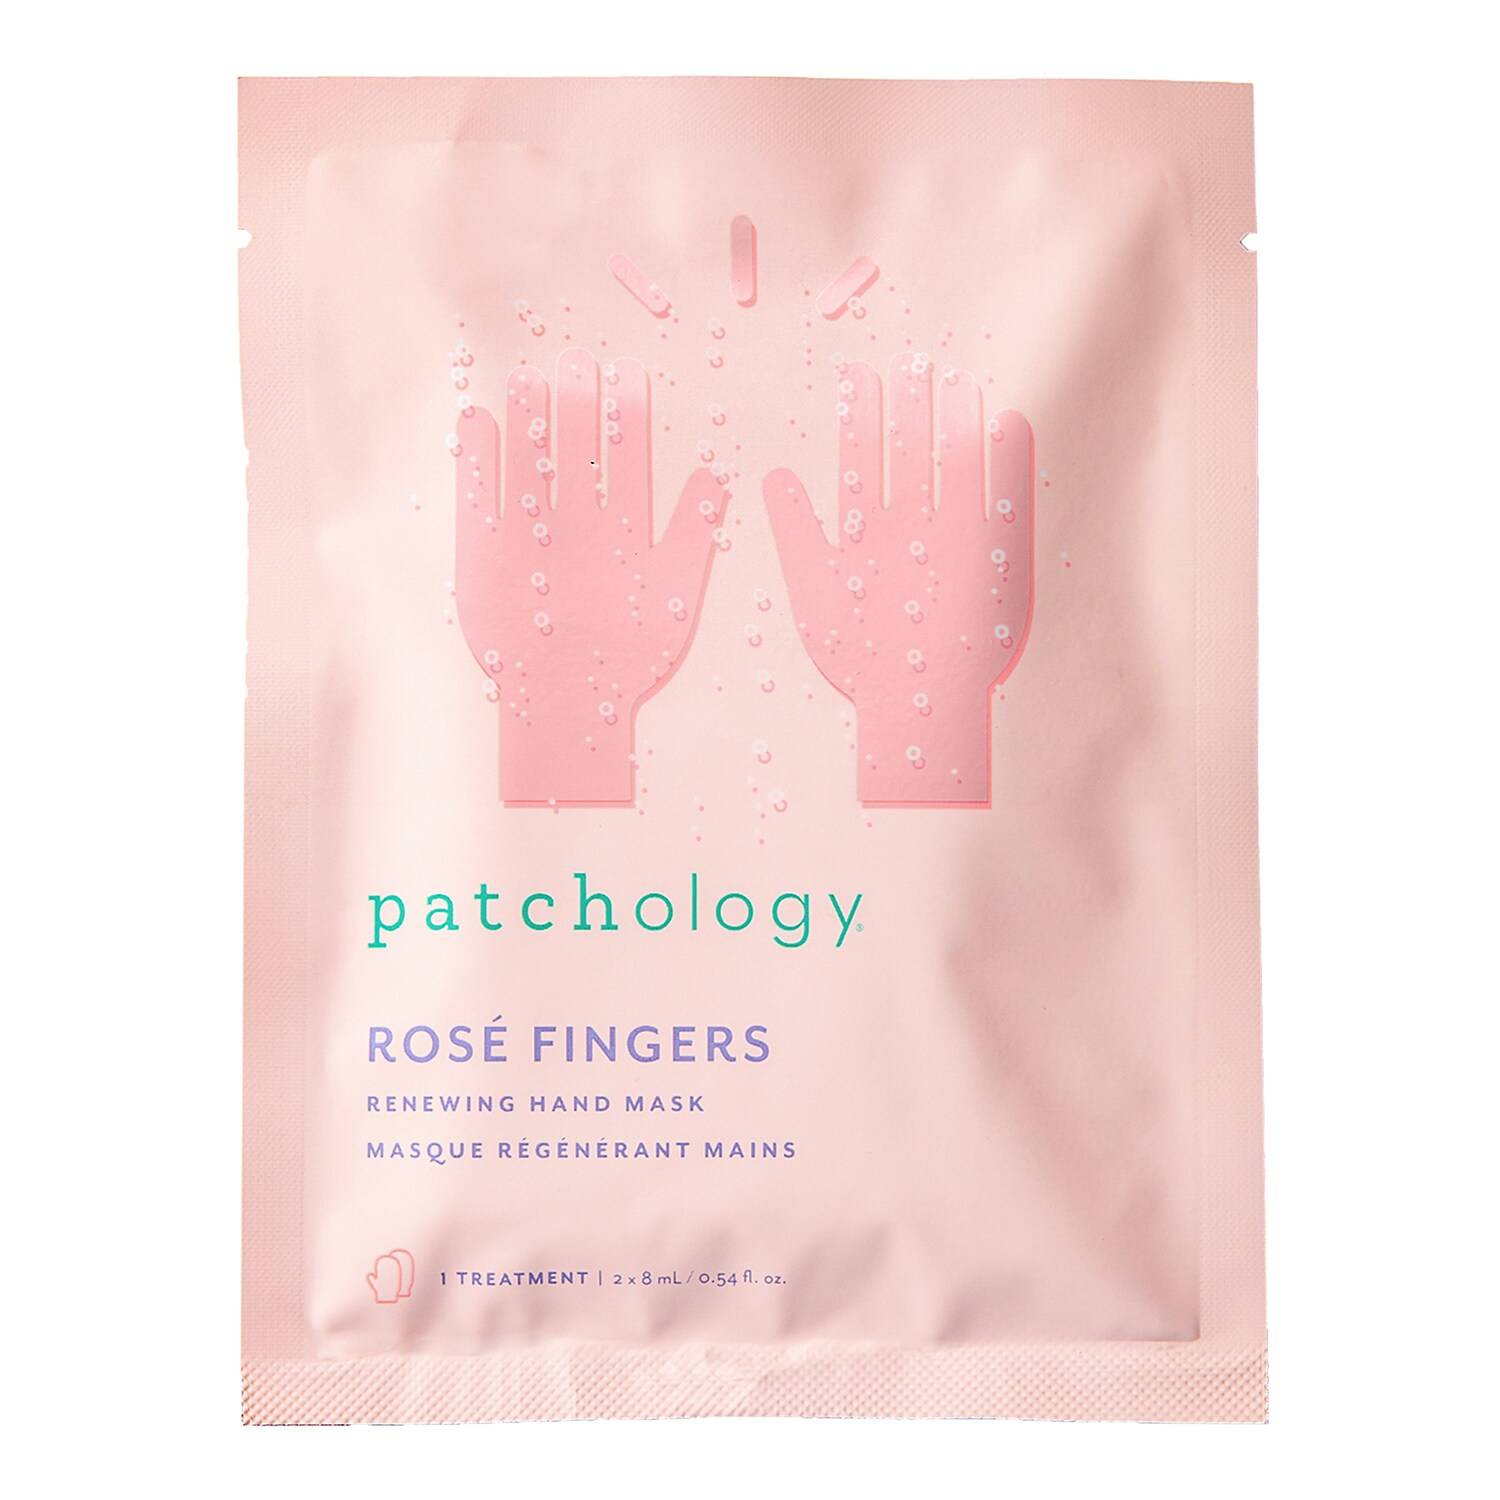 Patchology Rose Fingers Renewing Hand Mask 2 X 8 Ml